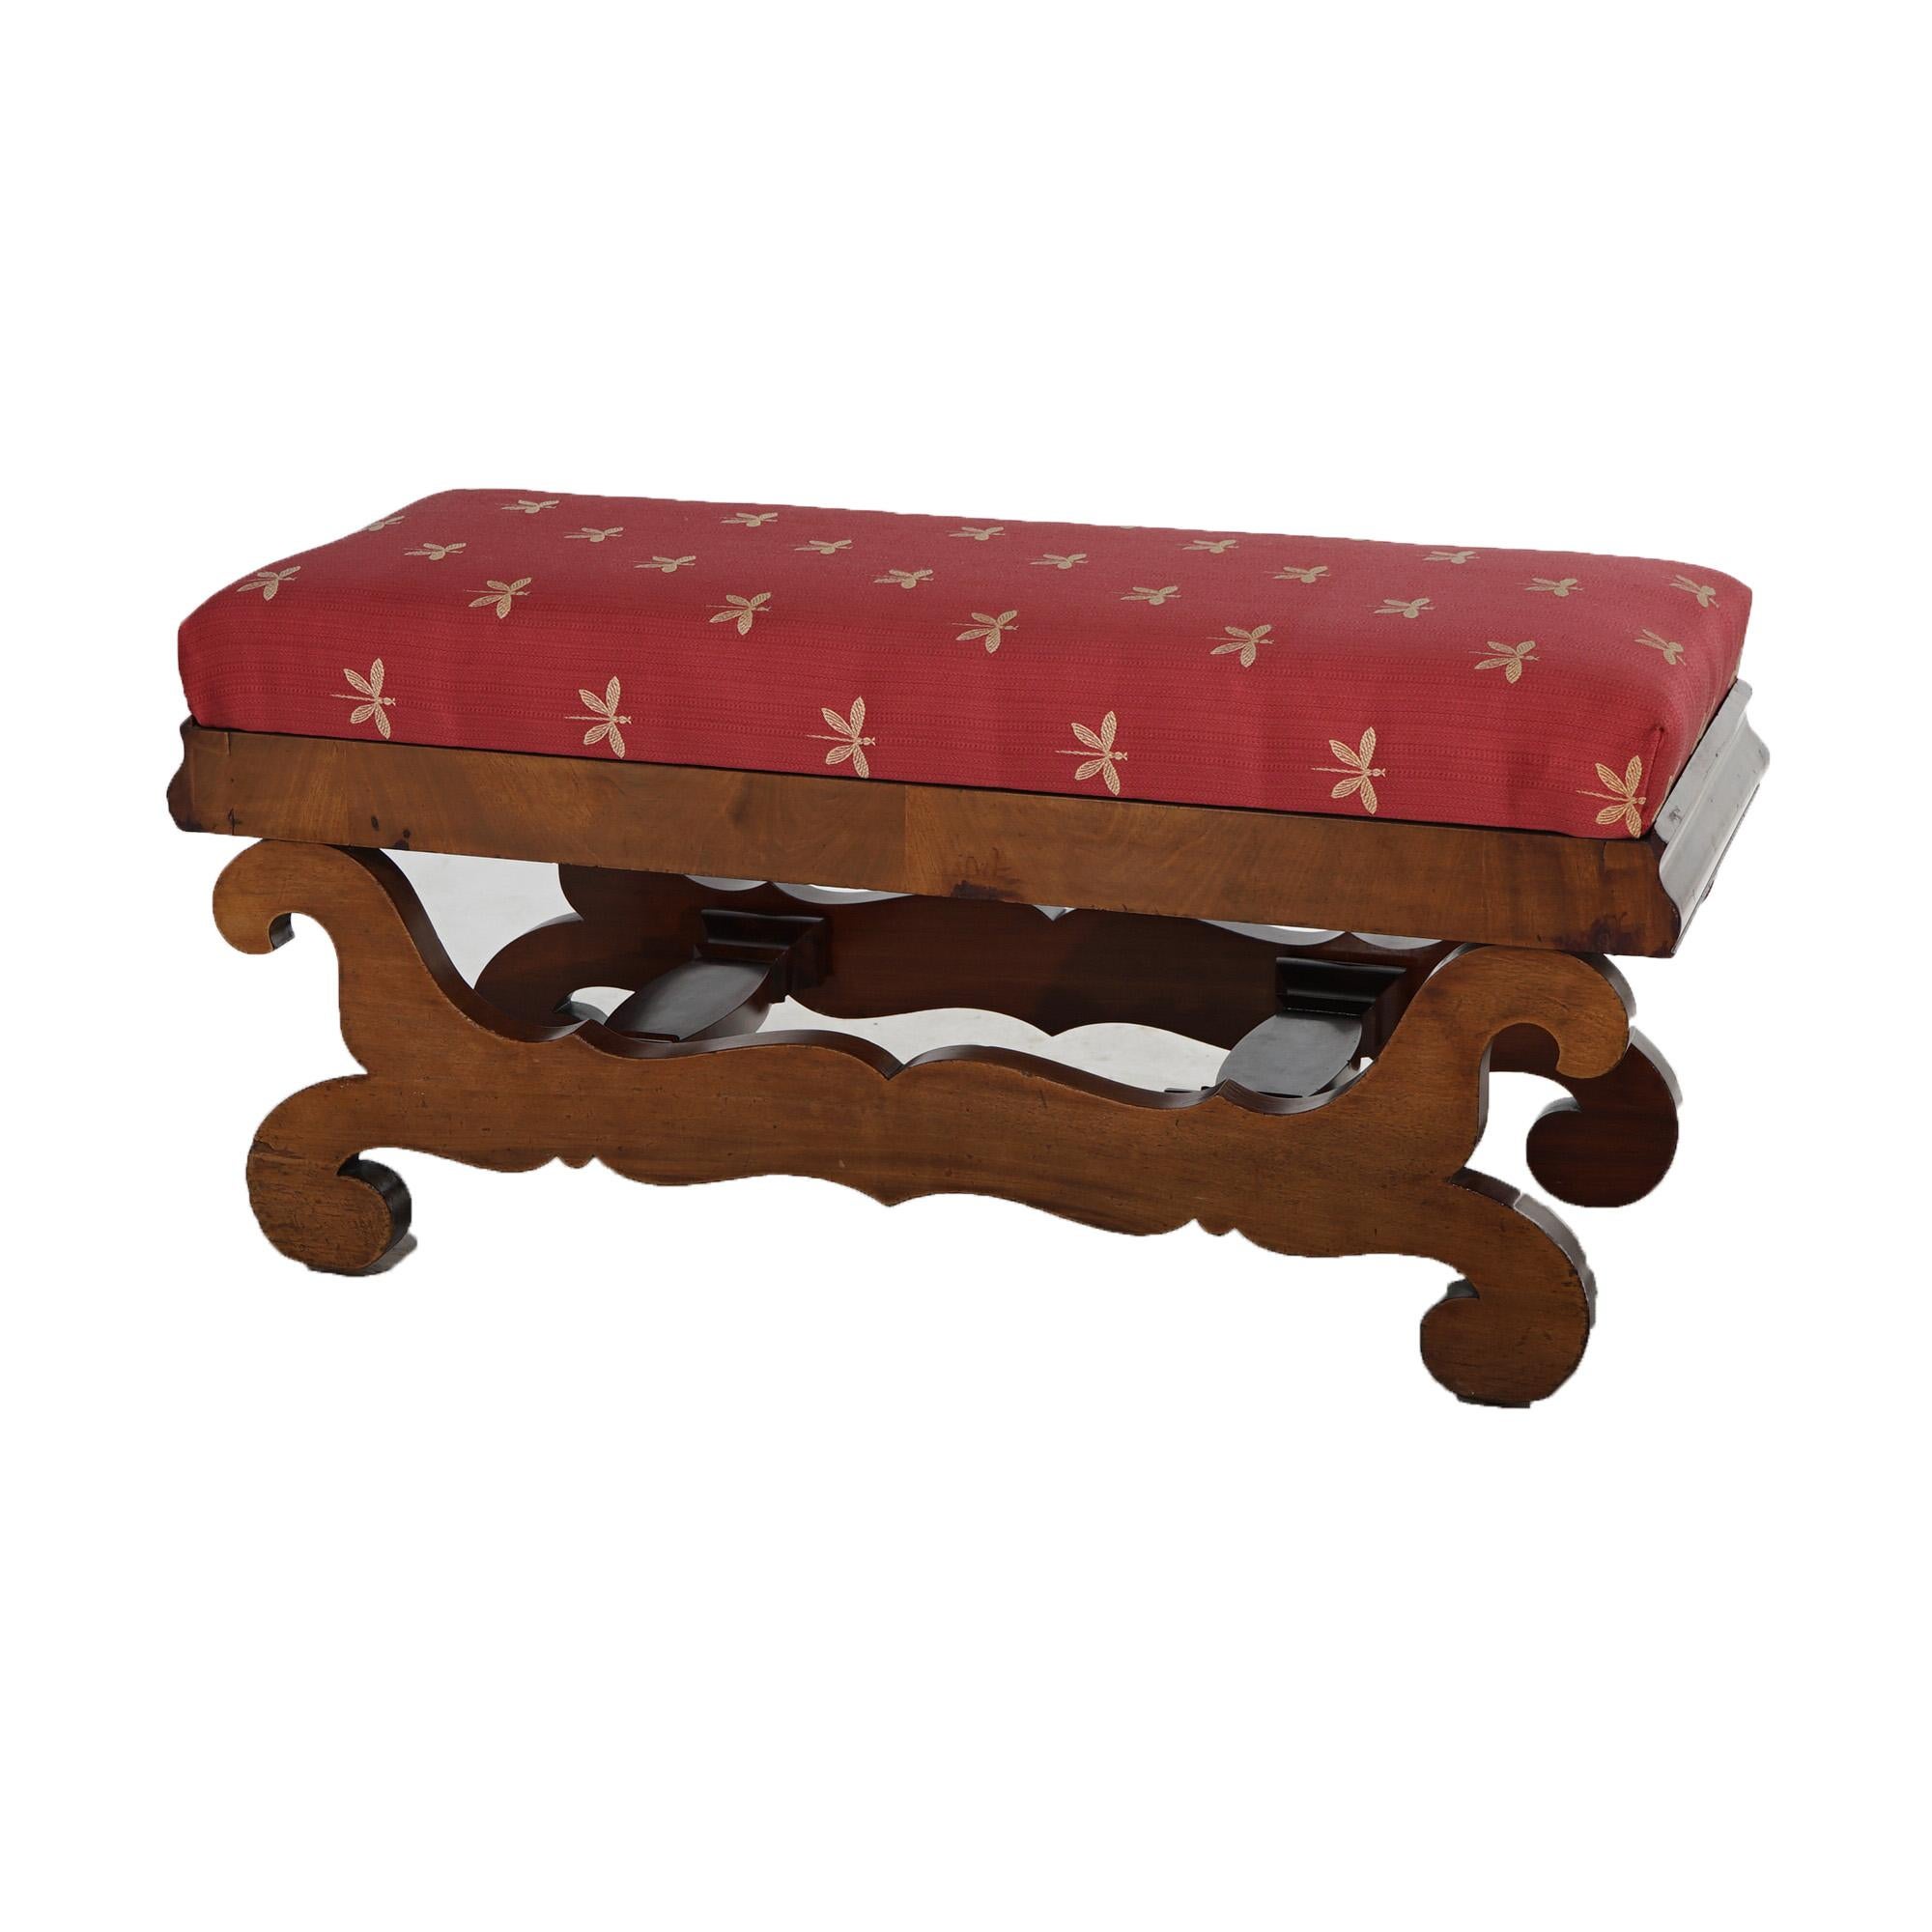 19th Century Antique Meeks School Classical American Empire Flame Mahogany Long Bench C1840's